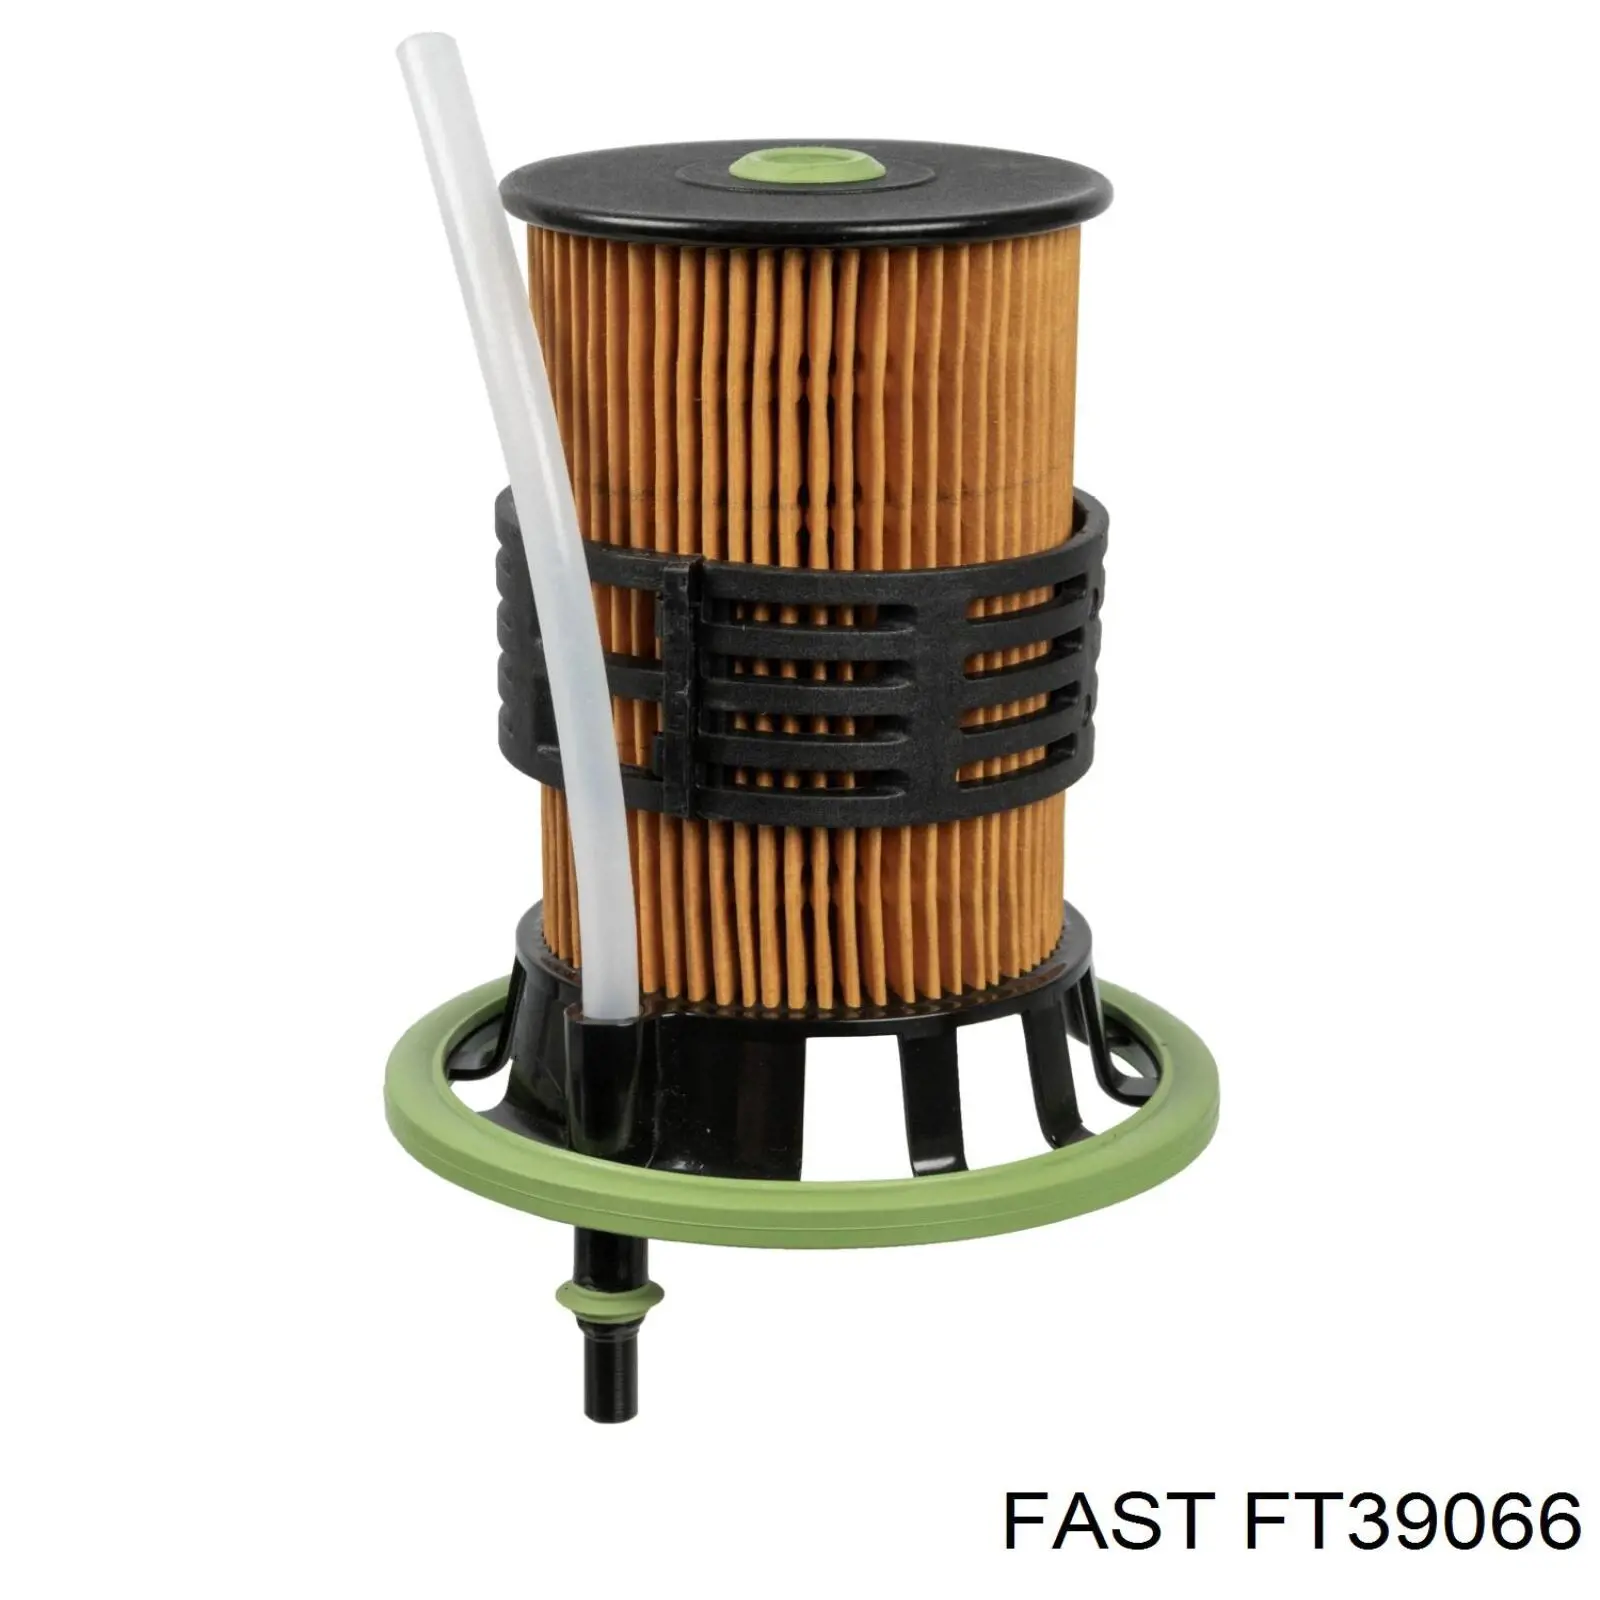 FT39066 Fast filtro combustible